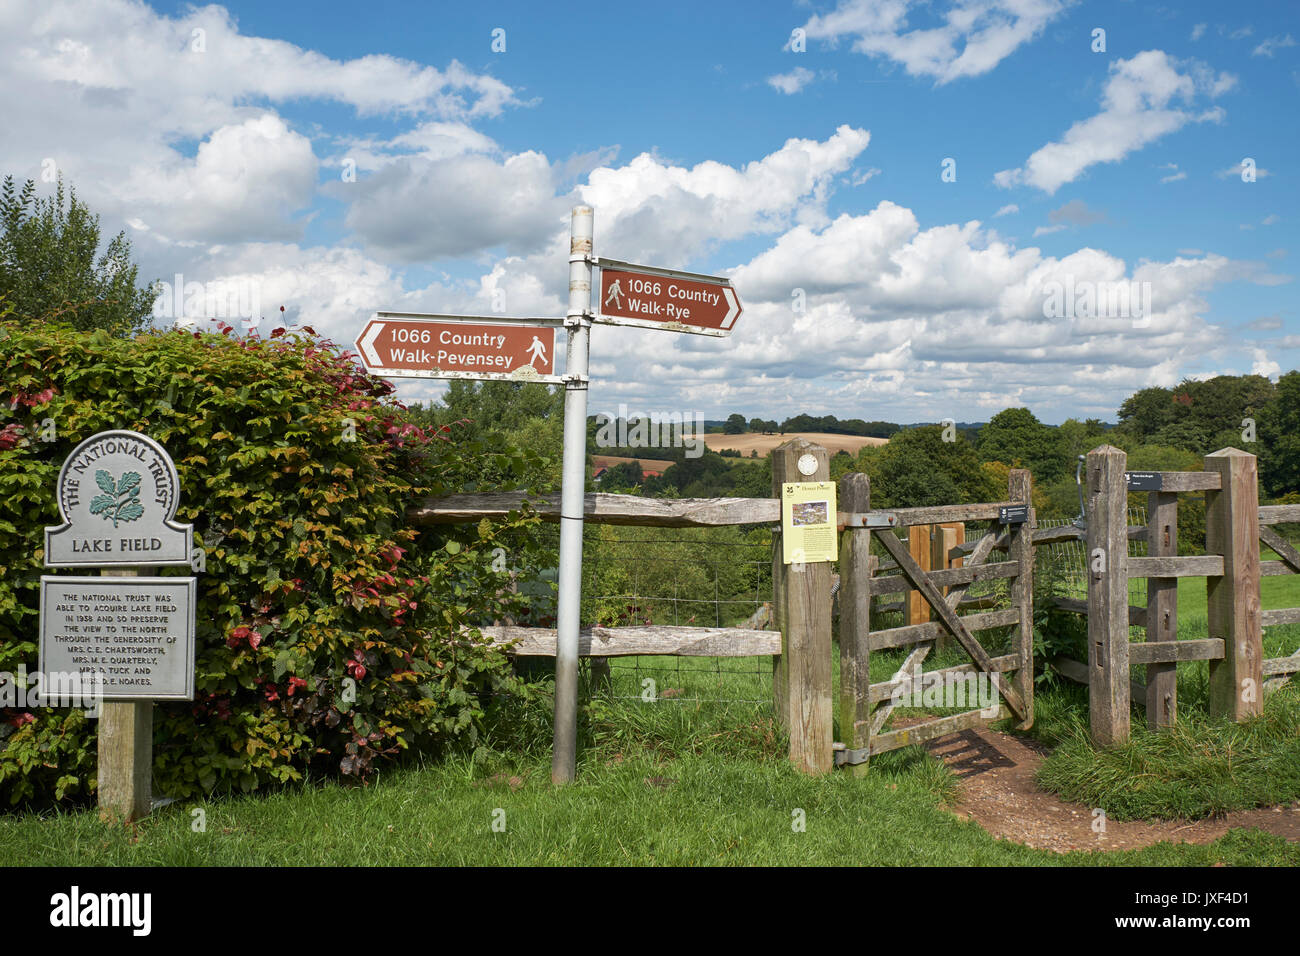 1066 Country Walk, finger post footpath signs pointing from Battle to Pevensey and from Battle to Rye, East Sussex countryside, UK, GB Stock Photo